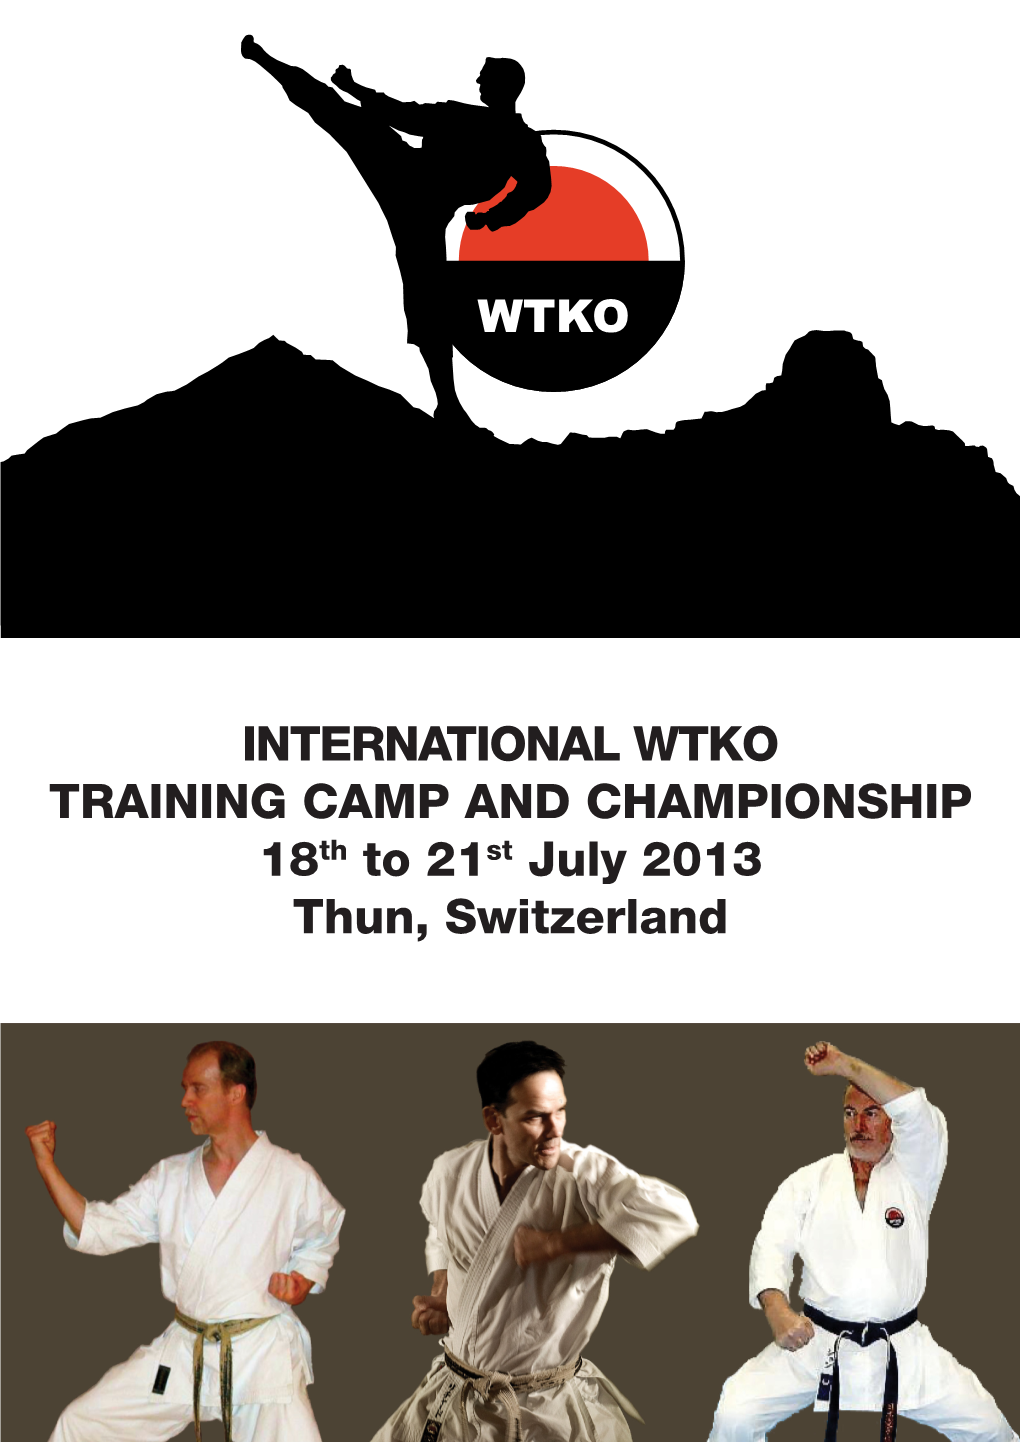 INTERNATIONAL WTKO TRAINING CAMP and CHAMPIONSHIP 18Th to 21St July 2013 Thun, Switzerland Welcome to the International WTKO Training Camp and Championship